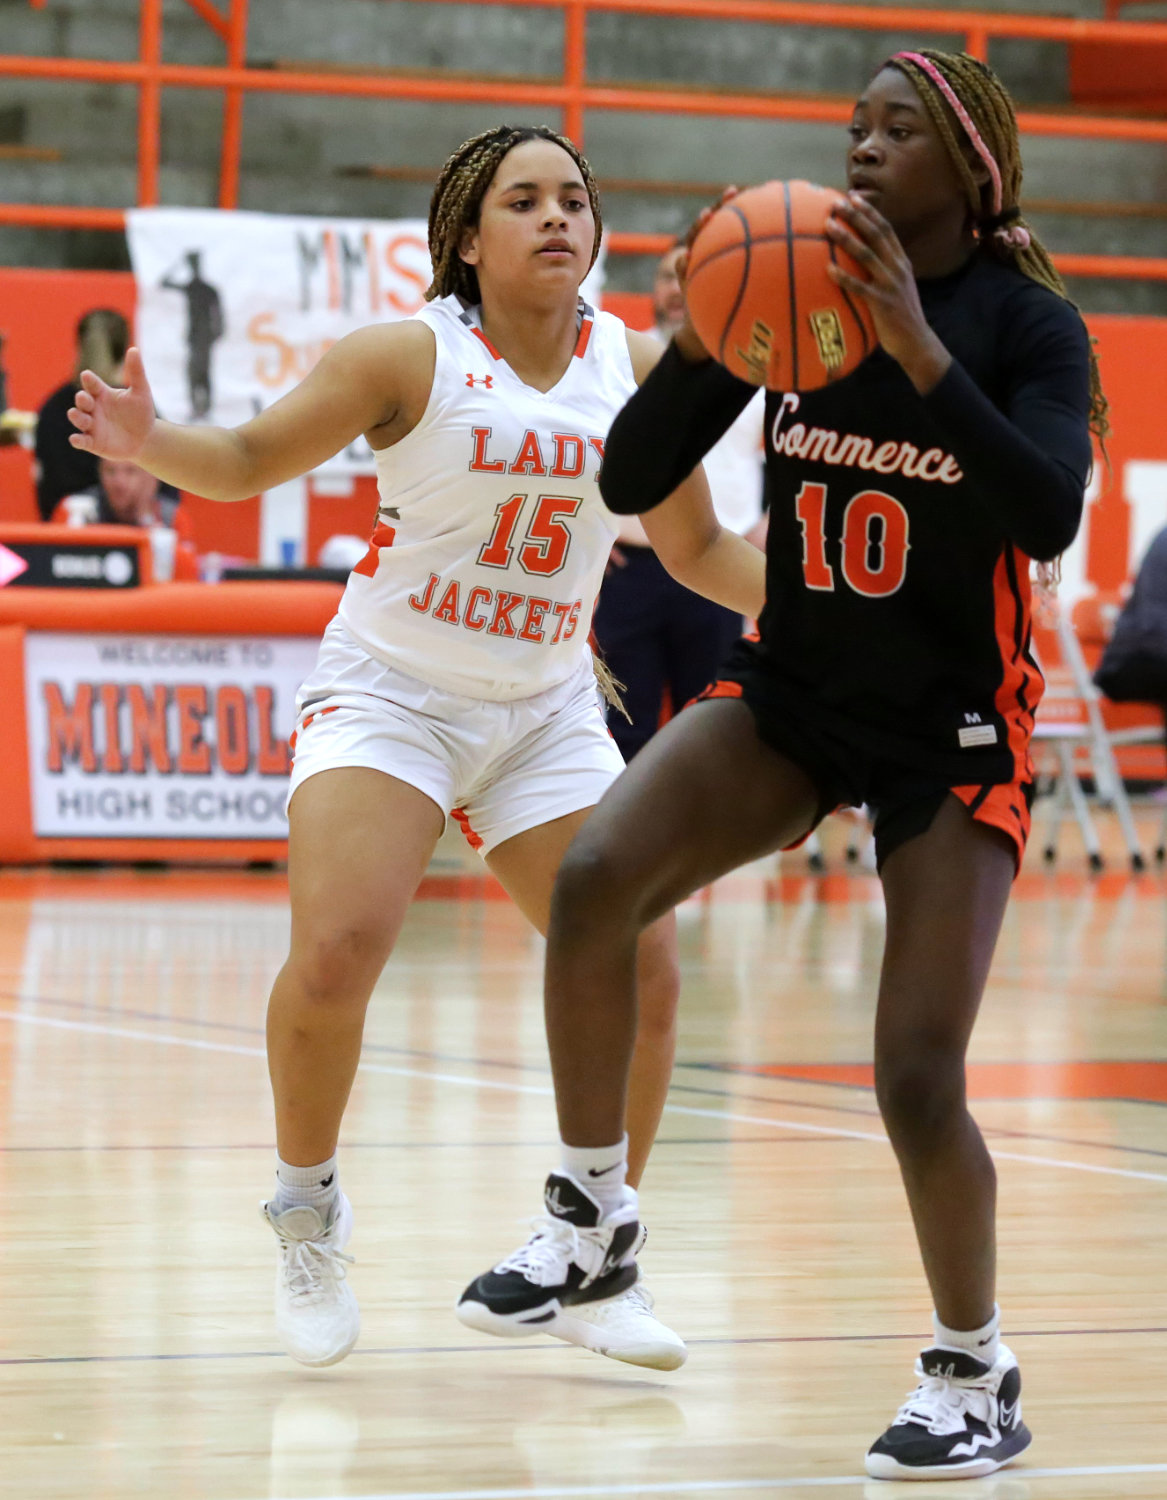 Paris Spigner’s energy and offensive, as well as defensive, contributions fueled the Lady Jackets.